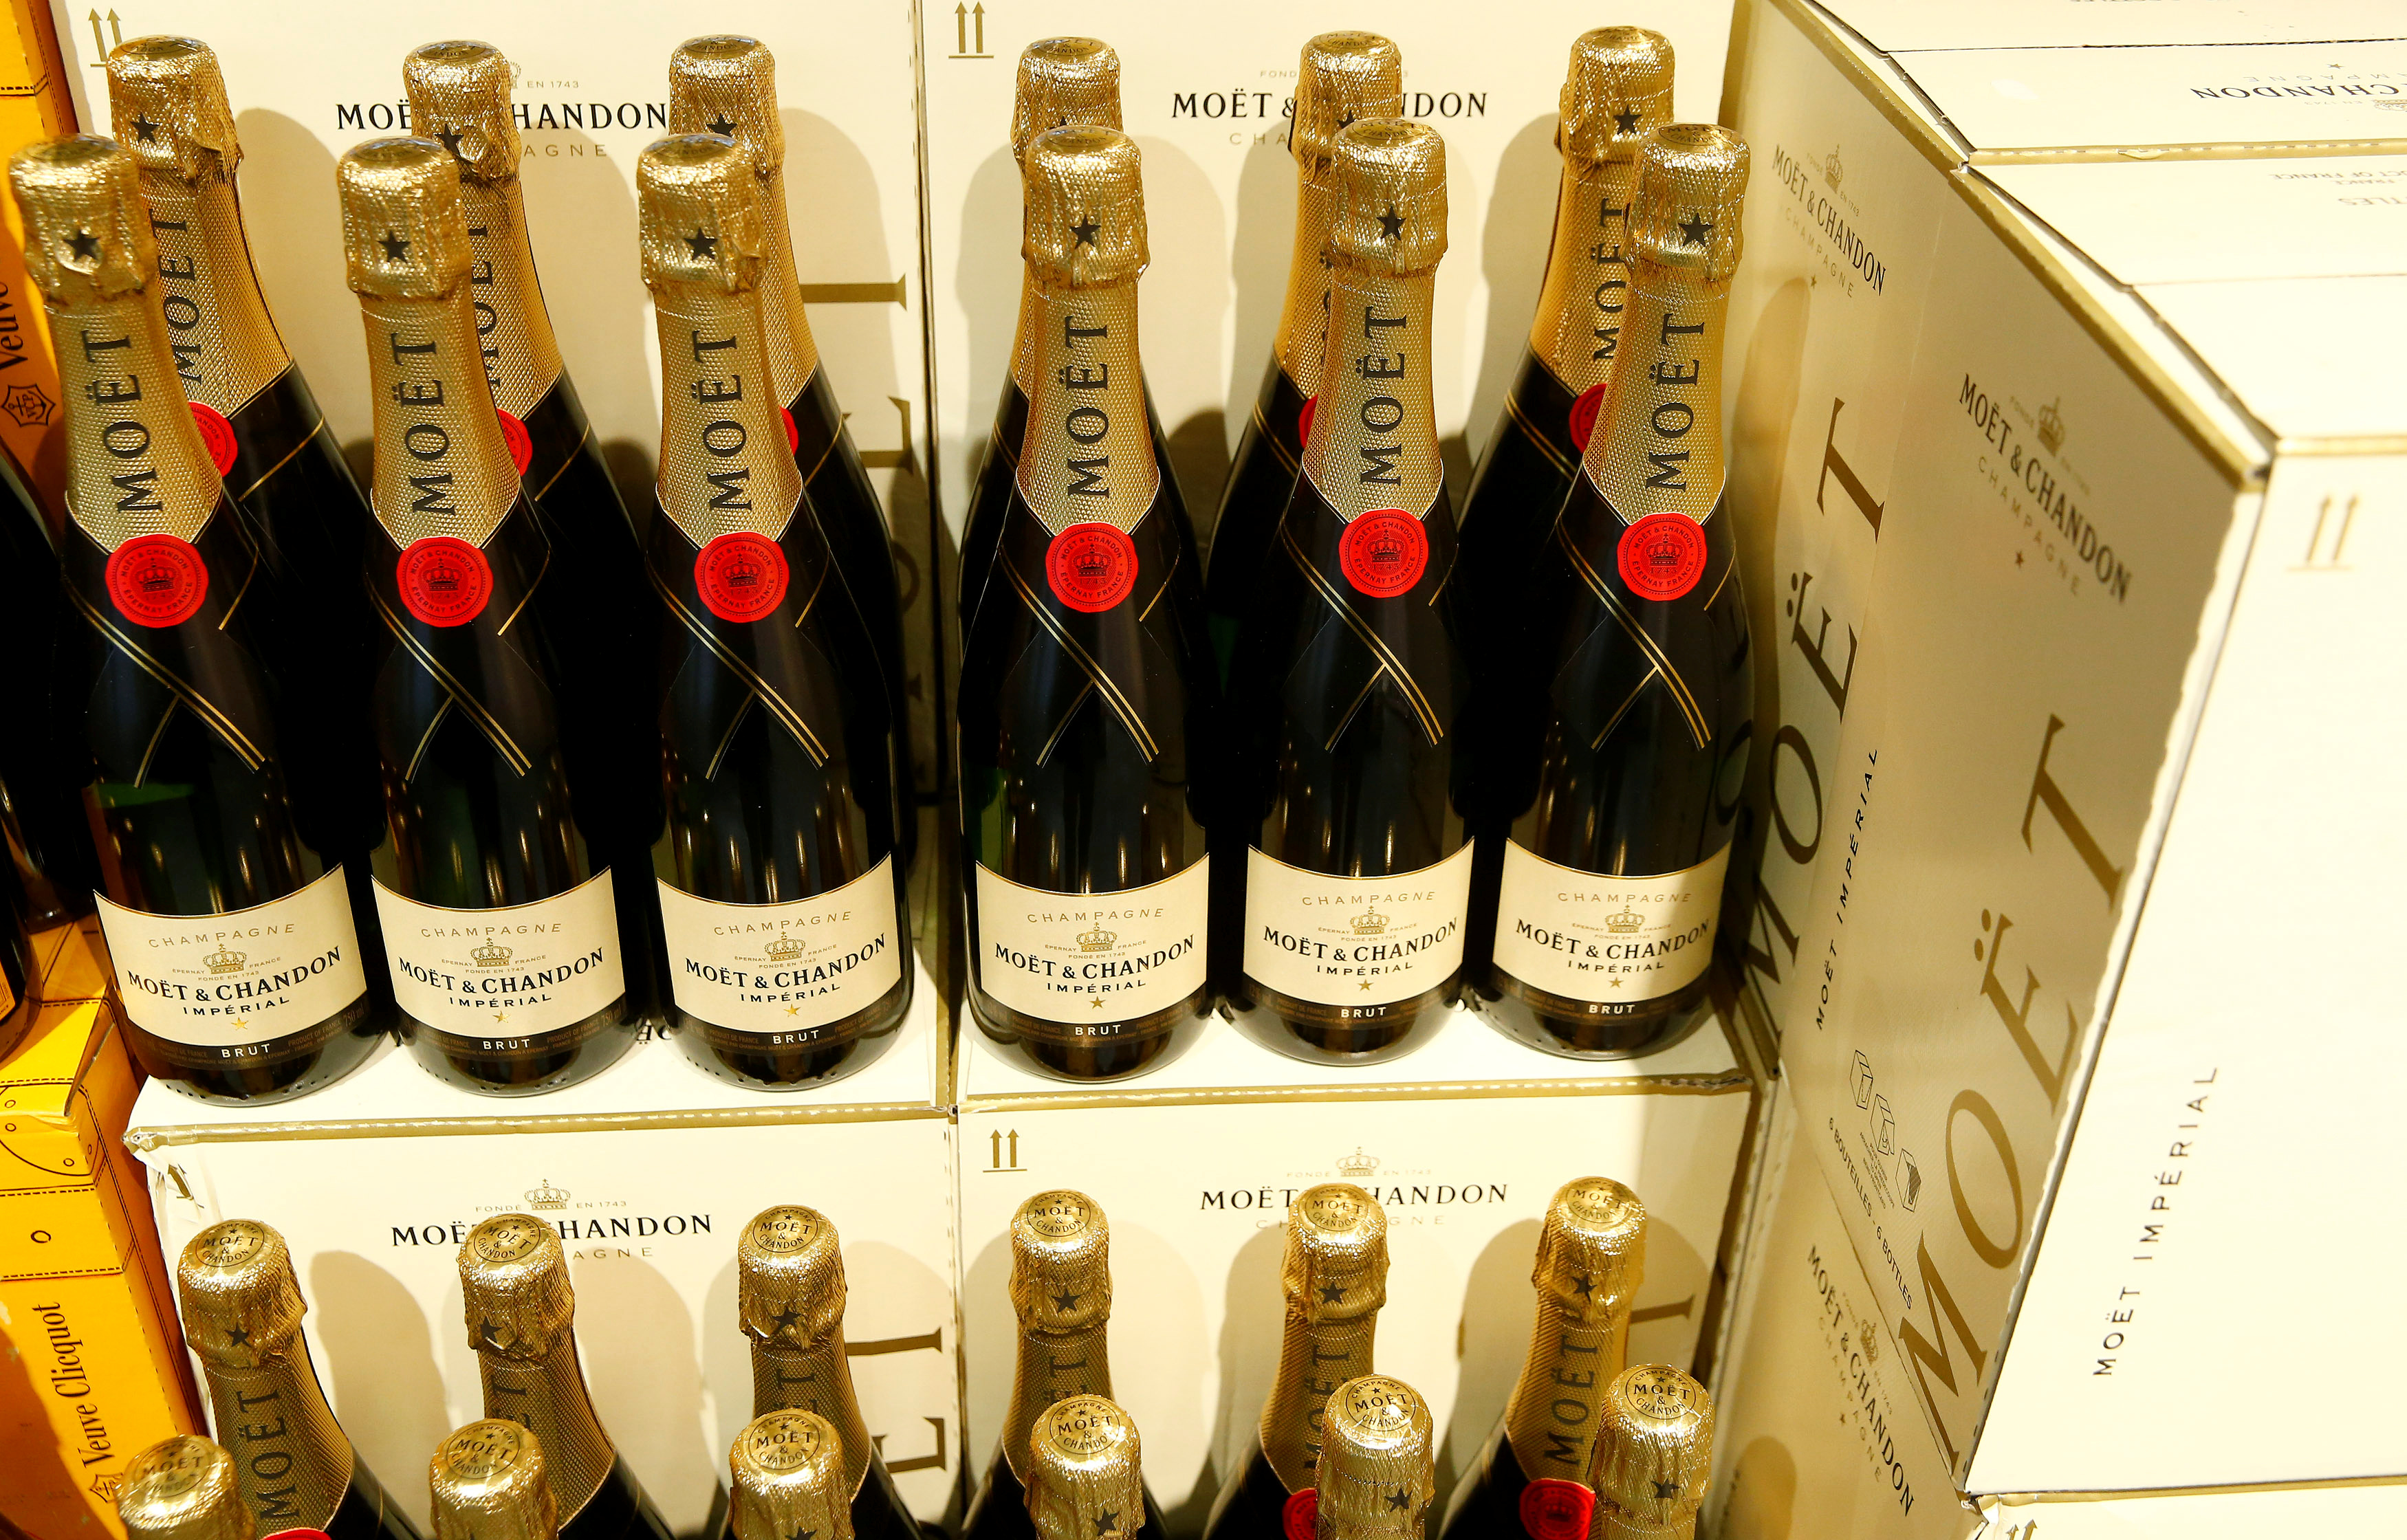 Bottles of French Moet & Chandon champagne are offered at a supermarket of Swiss retail group Coop in Zumikon, Switzerland December 13, 2016.  REUTERS/Arnd Wiegmann